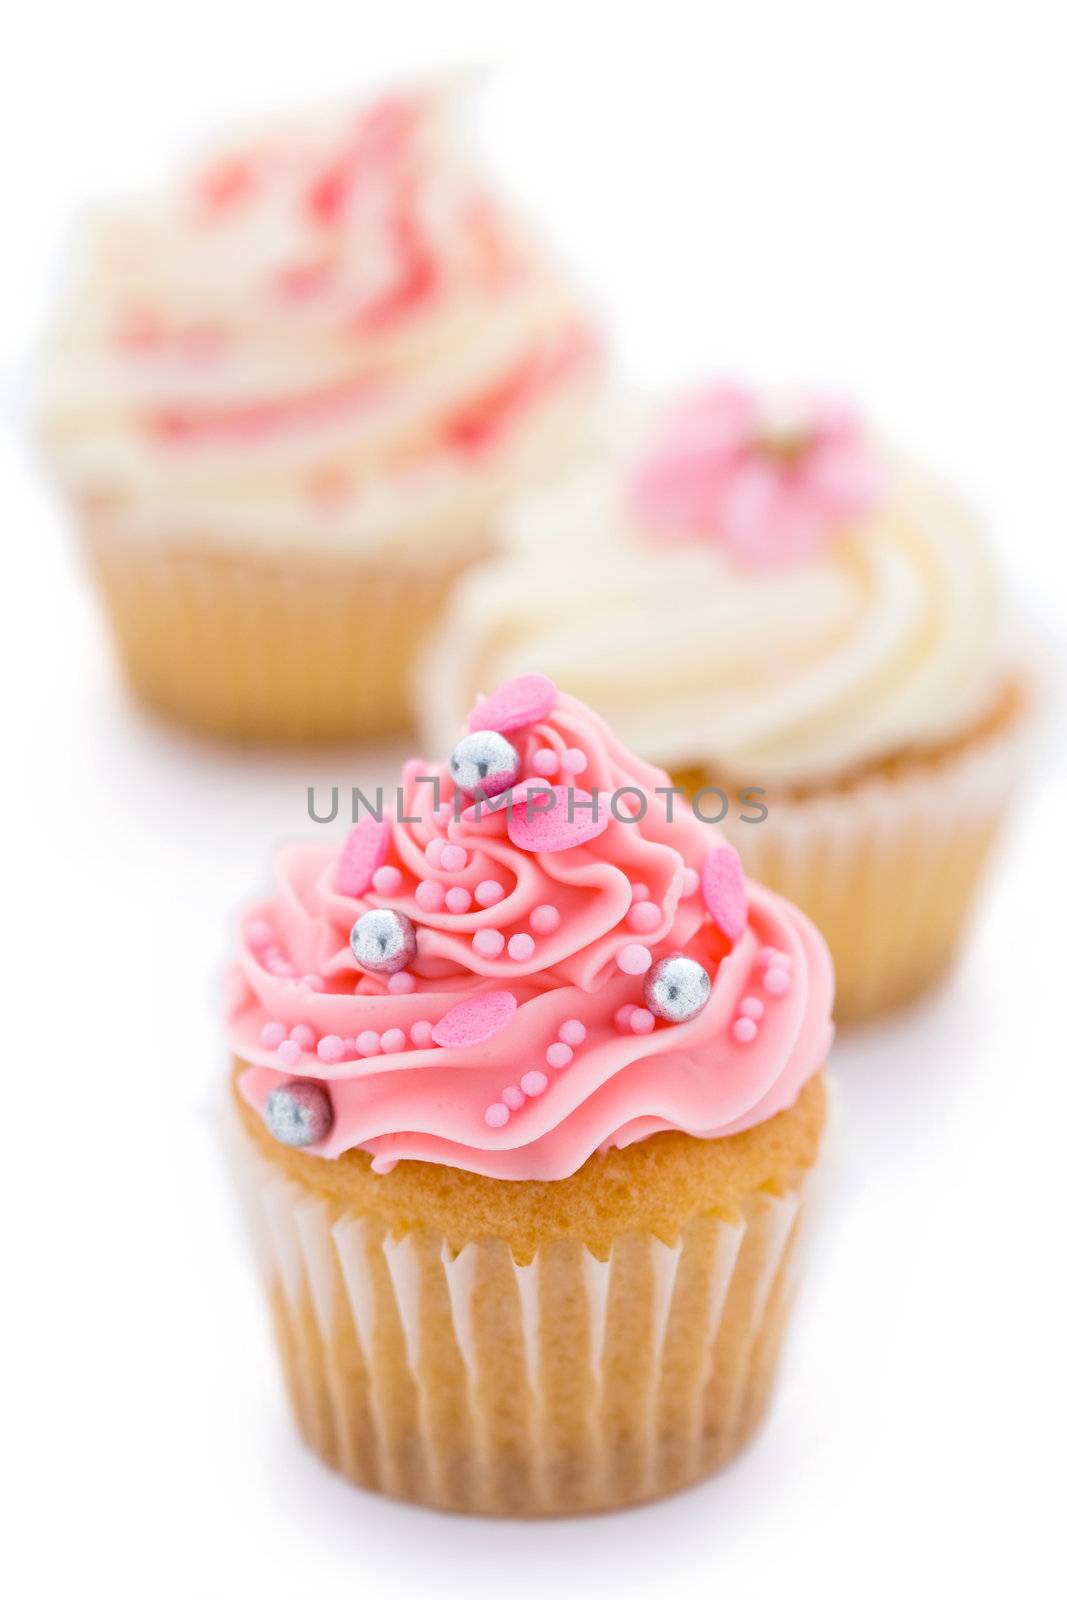 Trio of pink and white cupcakes against white